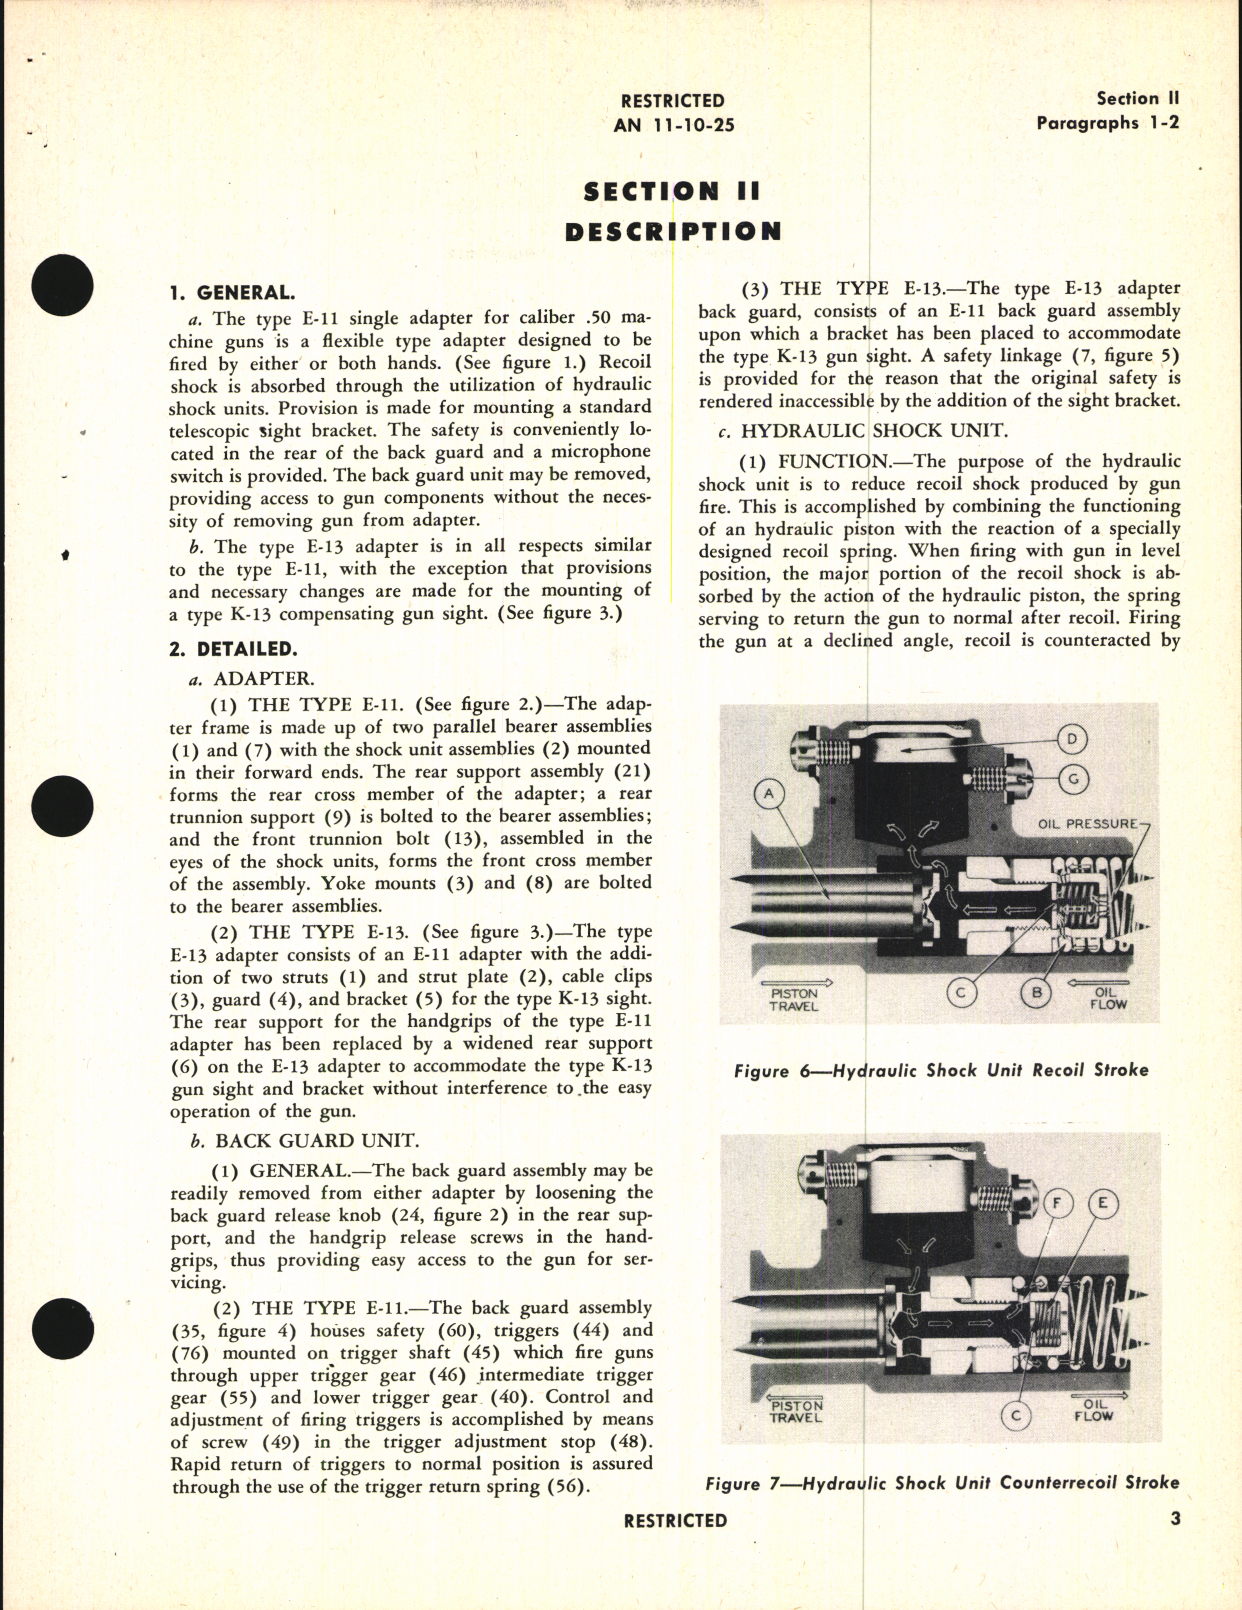 Sample page 7 from AirCorps Library document: Handbook of Instructions with Parts Catalog for Single Adapters for Caliber .50 Machine Guns